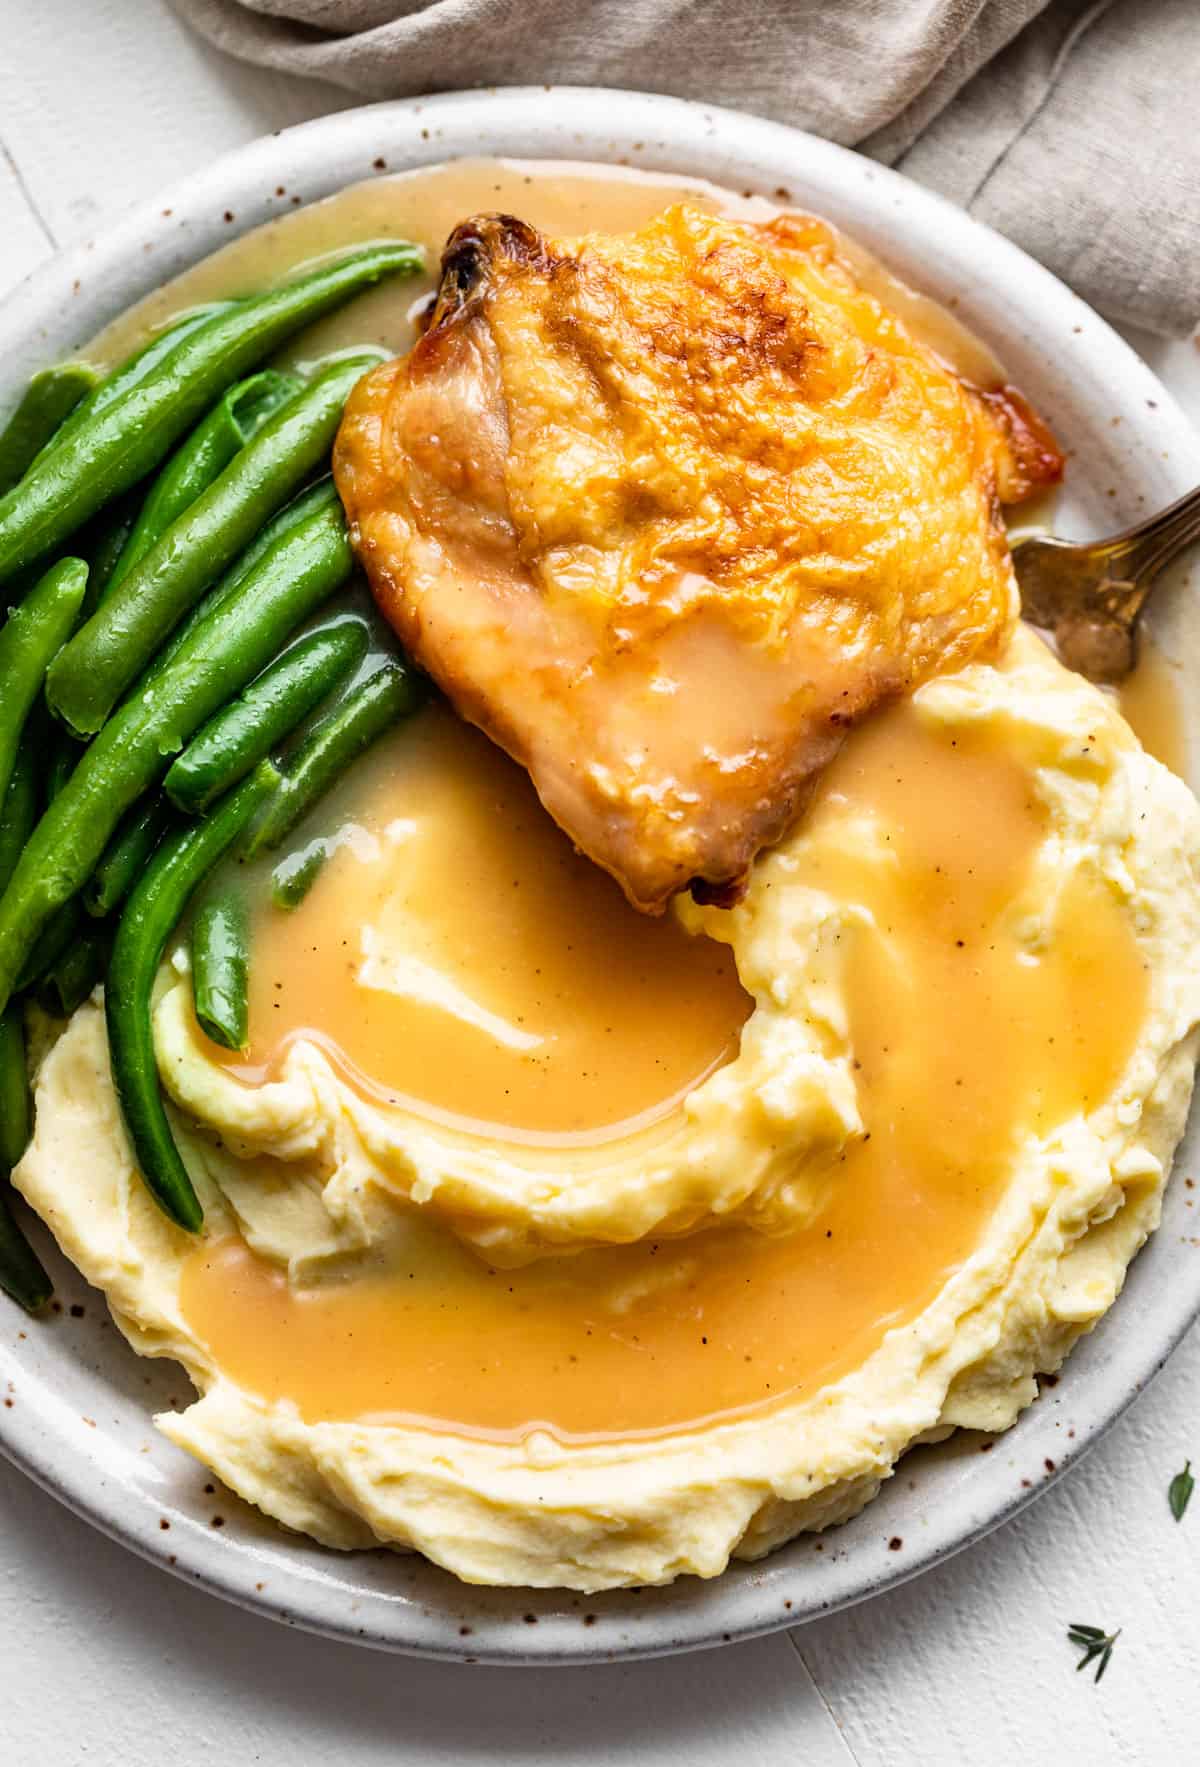 Straight down view of mashed potatoes, chicken, and green beans with gravy poured over the top.